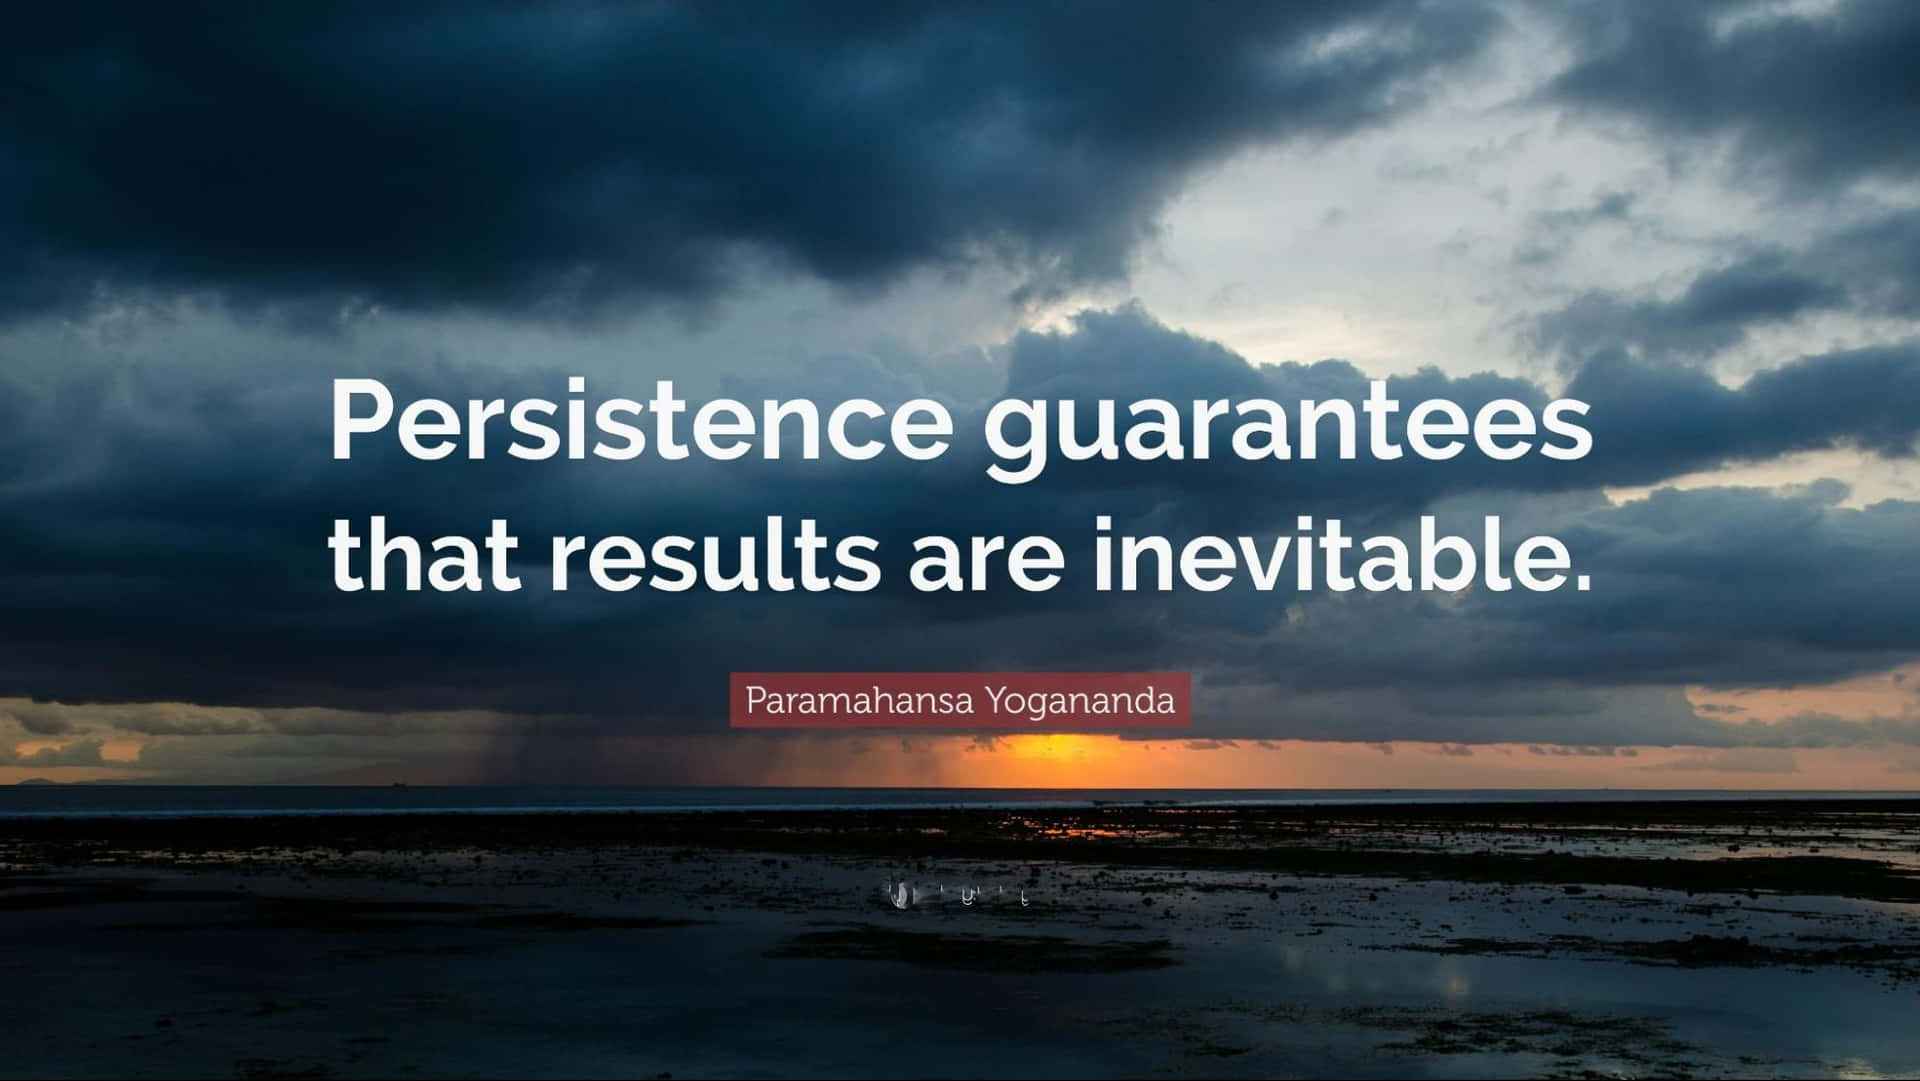 Being Persistent Guarantees Inevitable Results Wallpaper